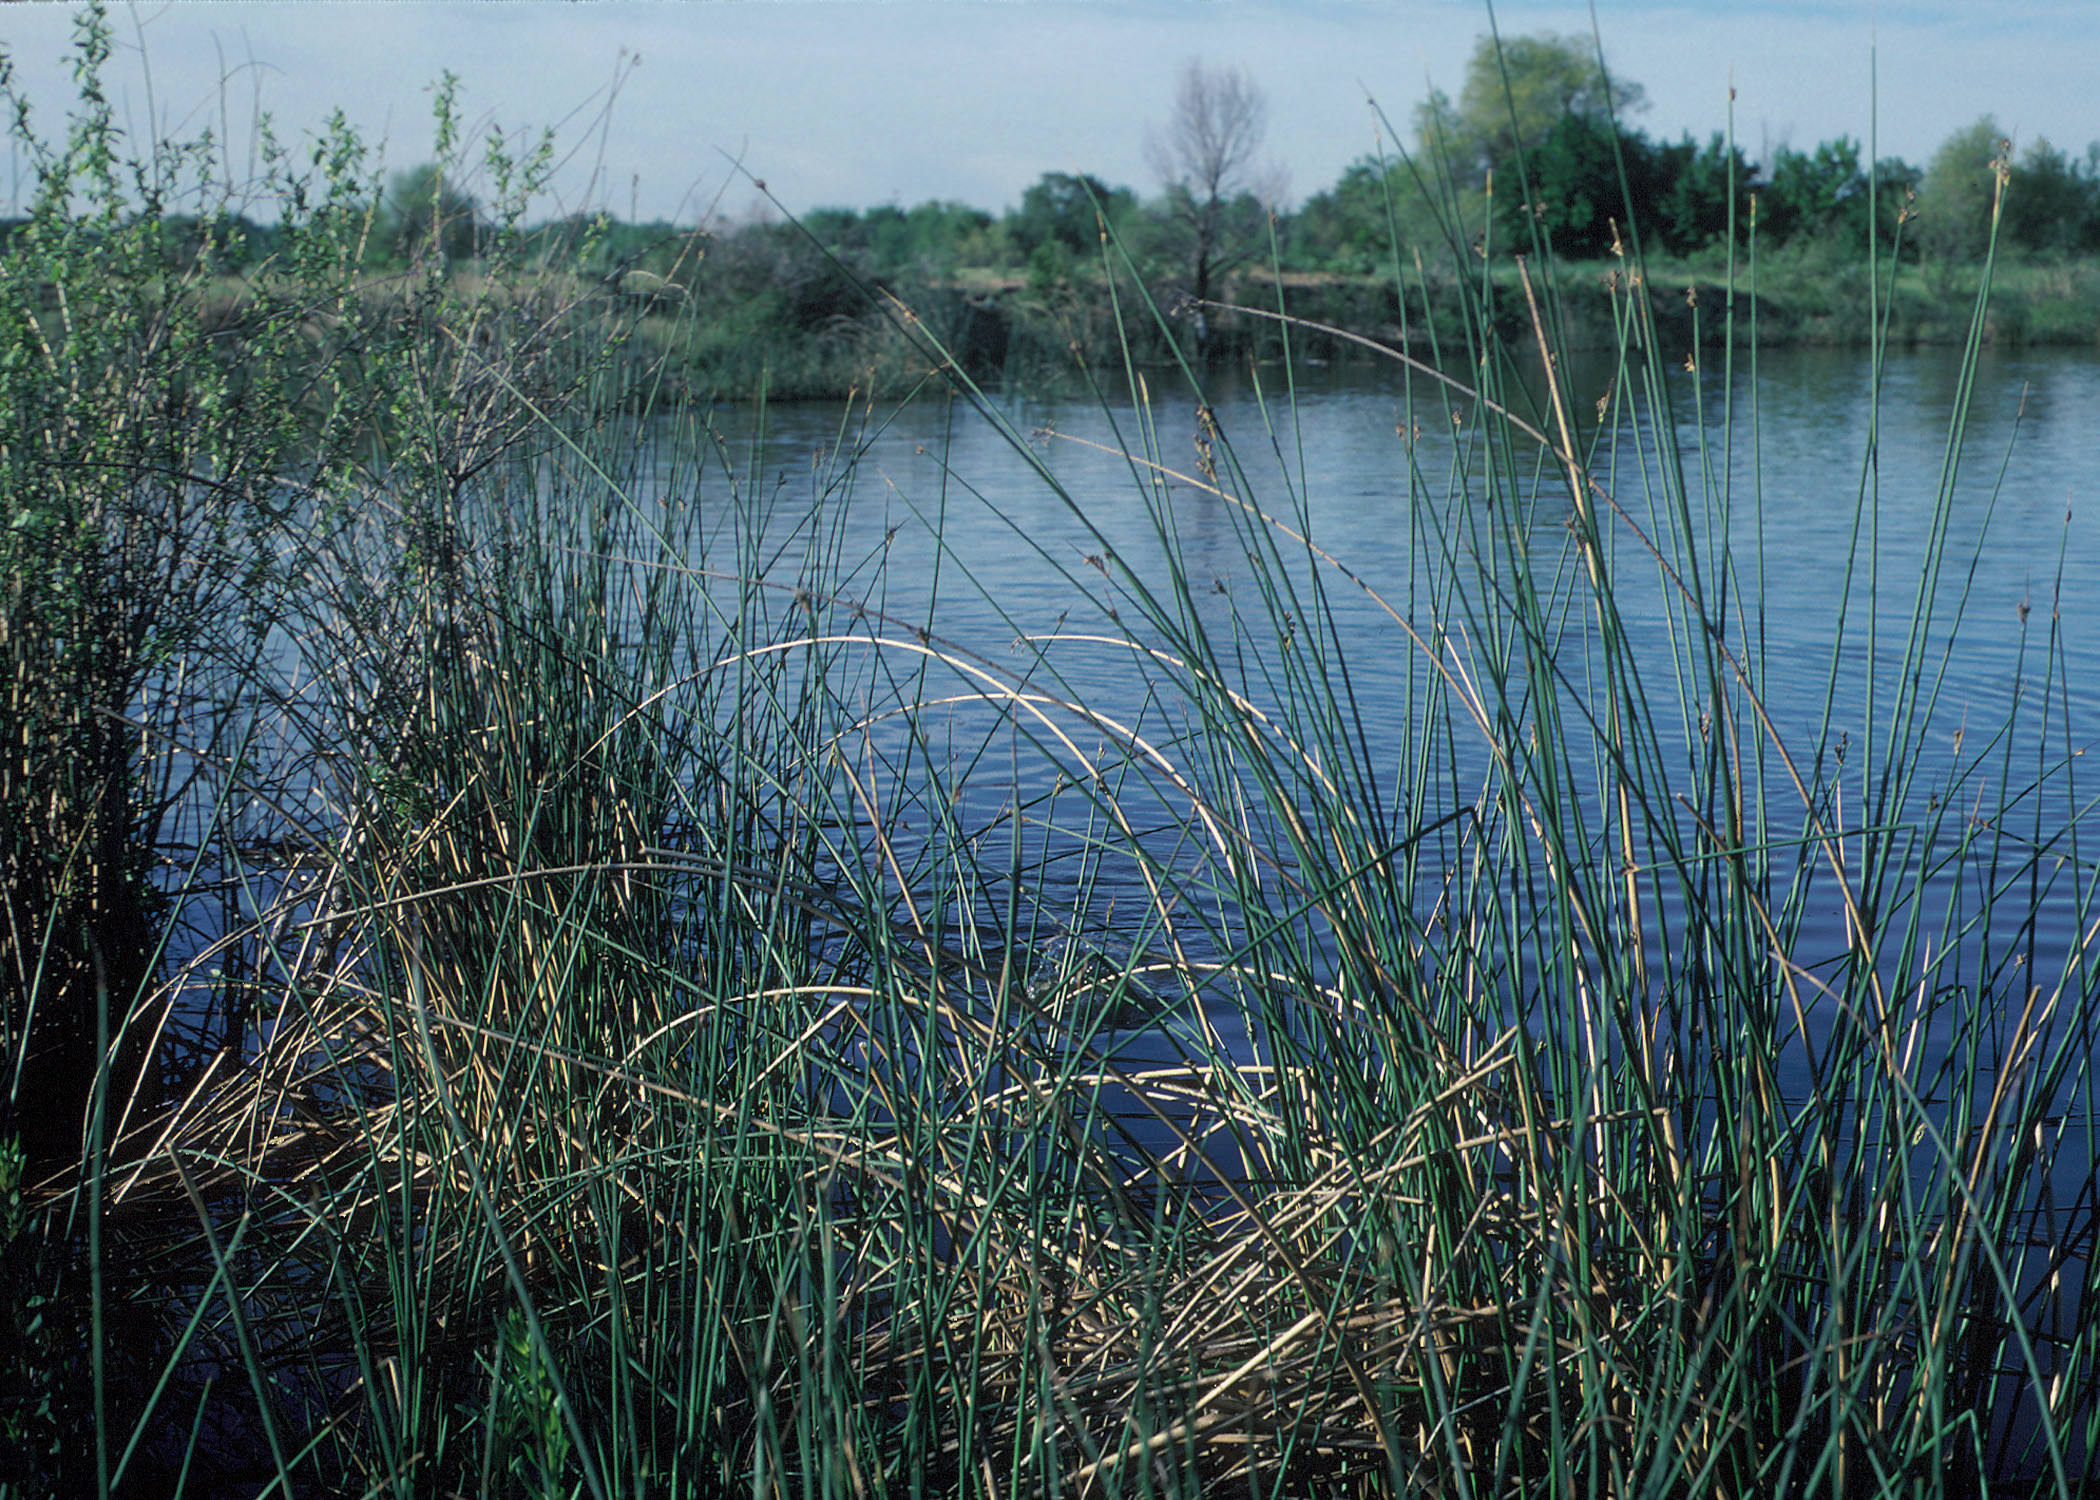 A constructed wetland with grass in the foreground.